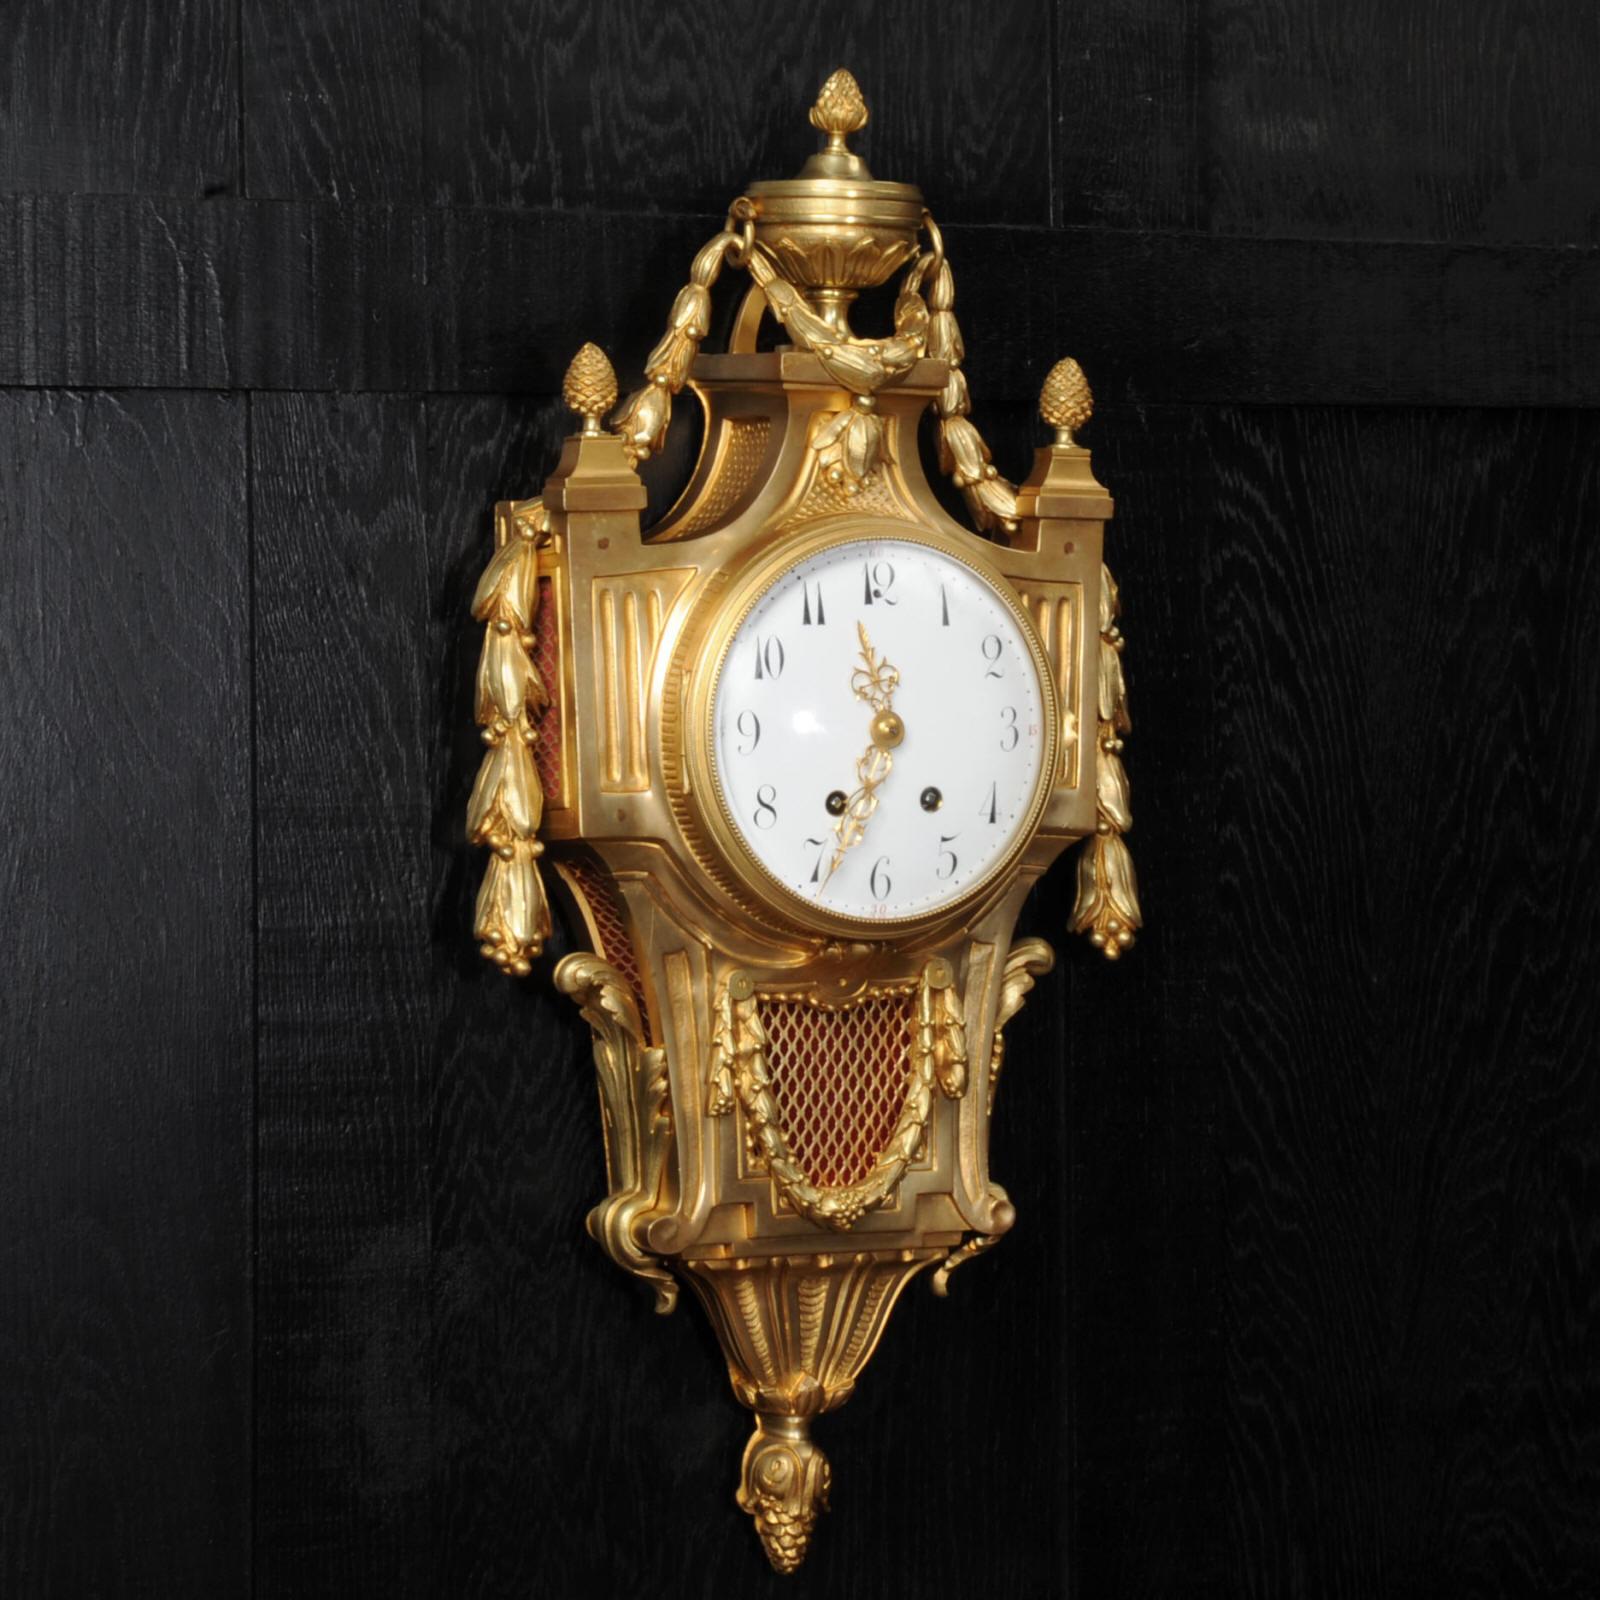 A large and stunning original antique French Cartel wall clock by Vincenti et Cie, circa 1870. It is Louis XVI in style, classical case with pineapple finials, a large urn and draped with a large acanthus swag. Beautifully made in gilt bronze. The